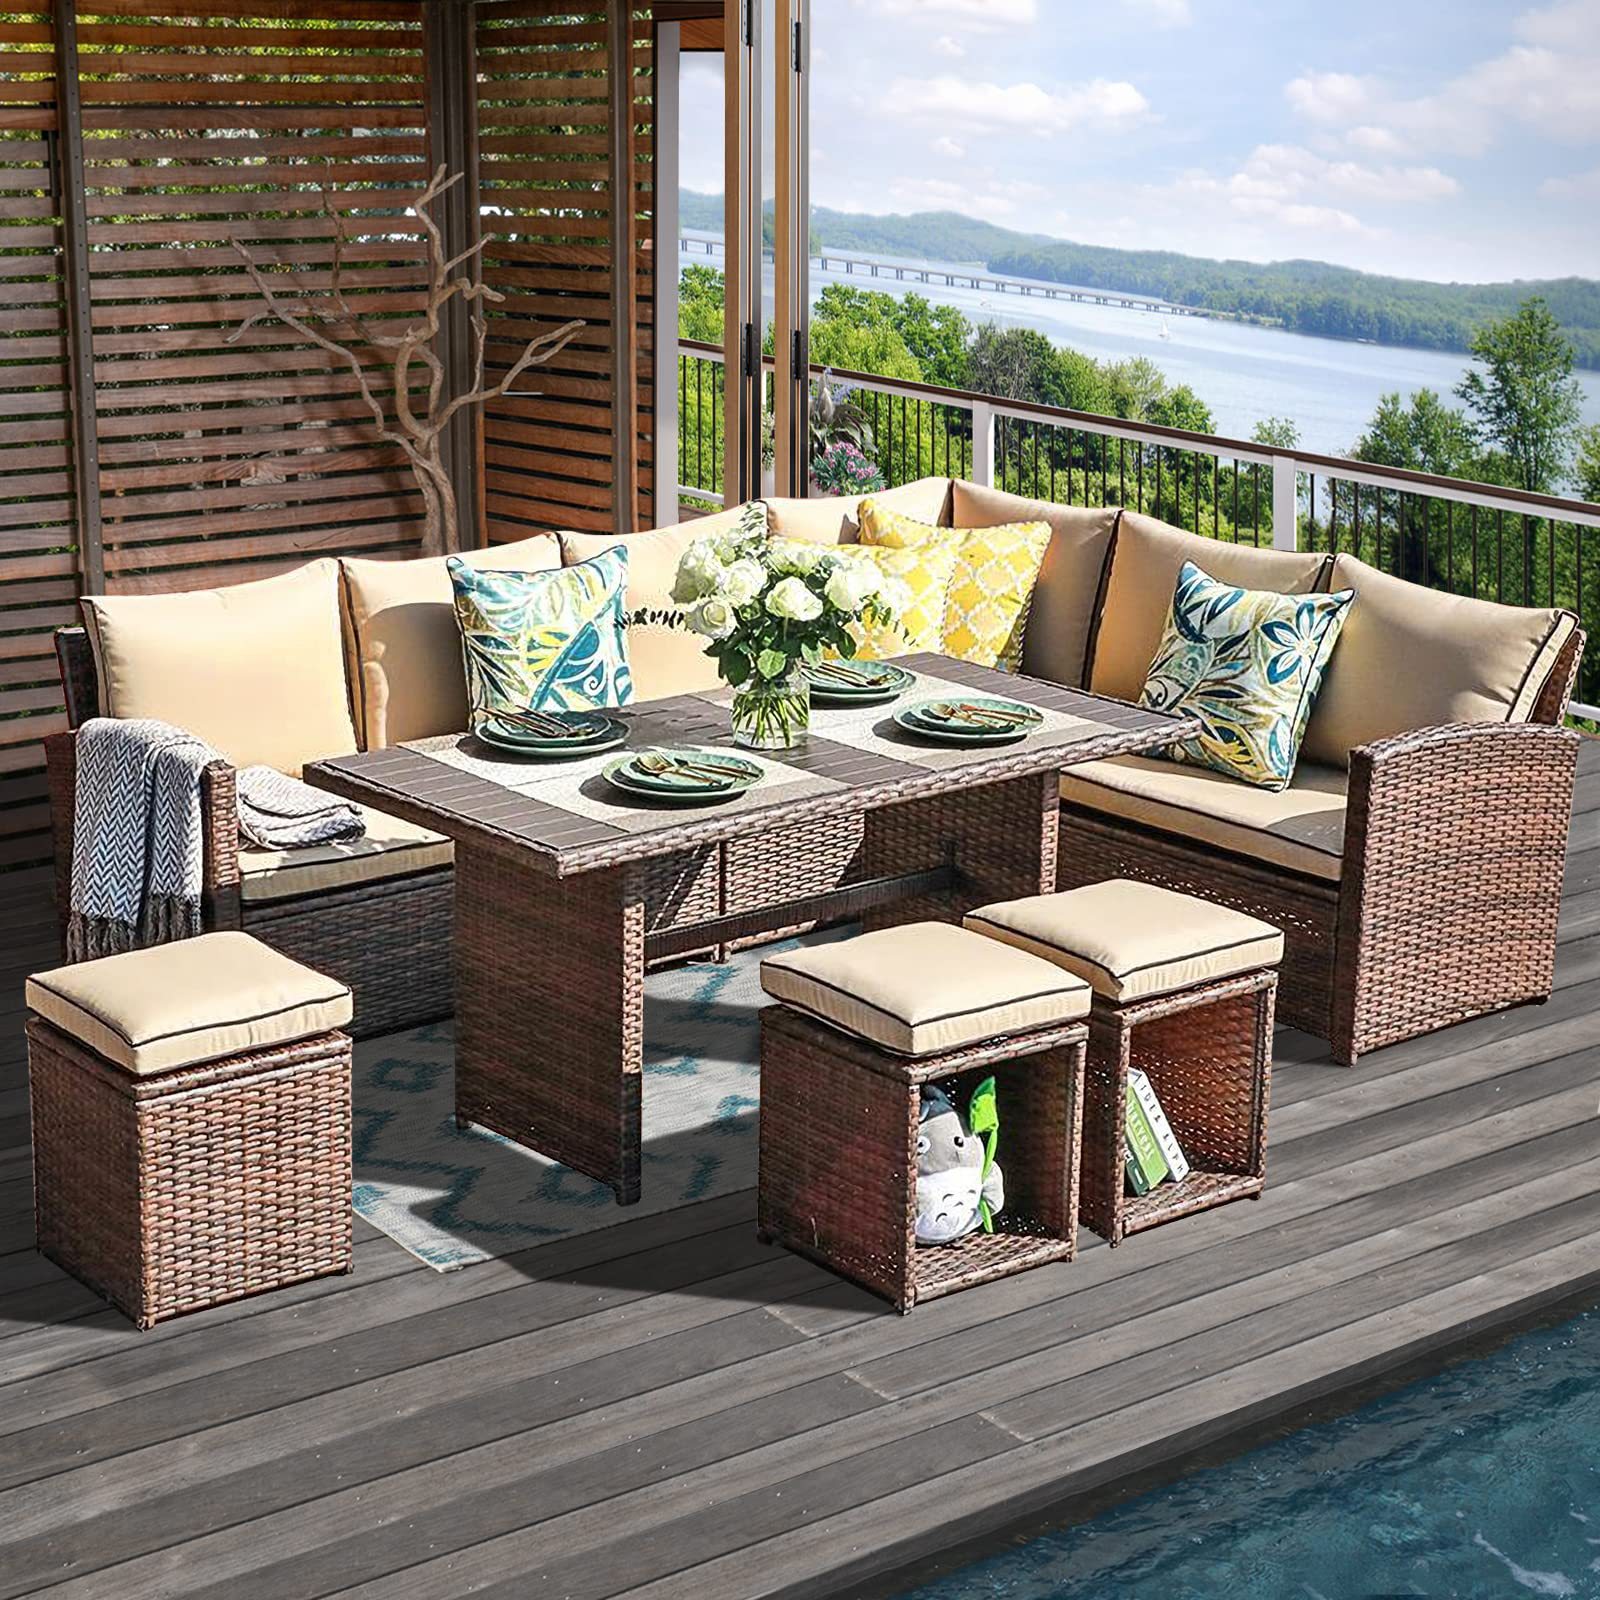 Outdoor Creative Design High Quality Backyard Couches Wicker Sectional Patio Furniture Sofa Set